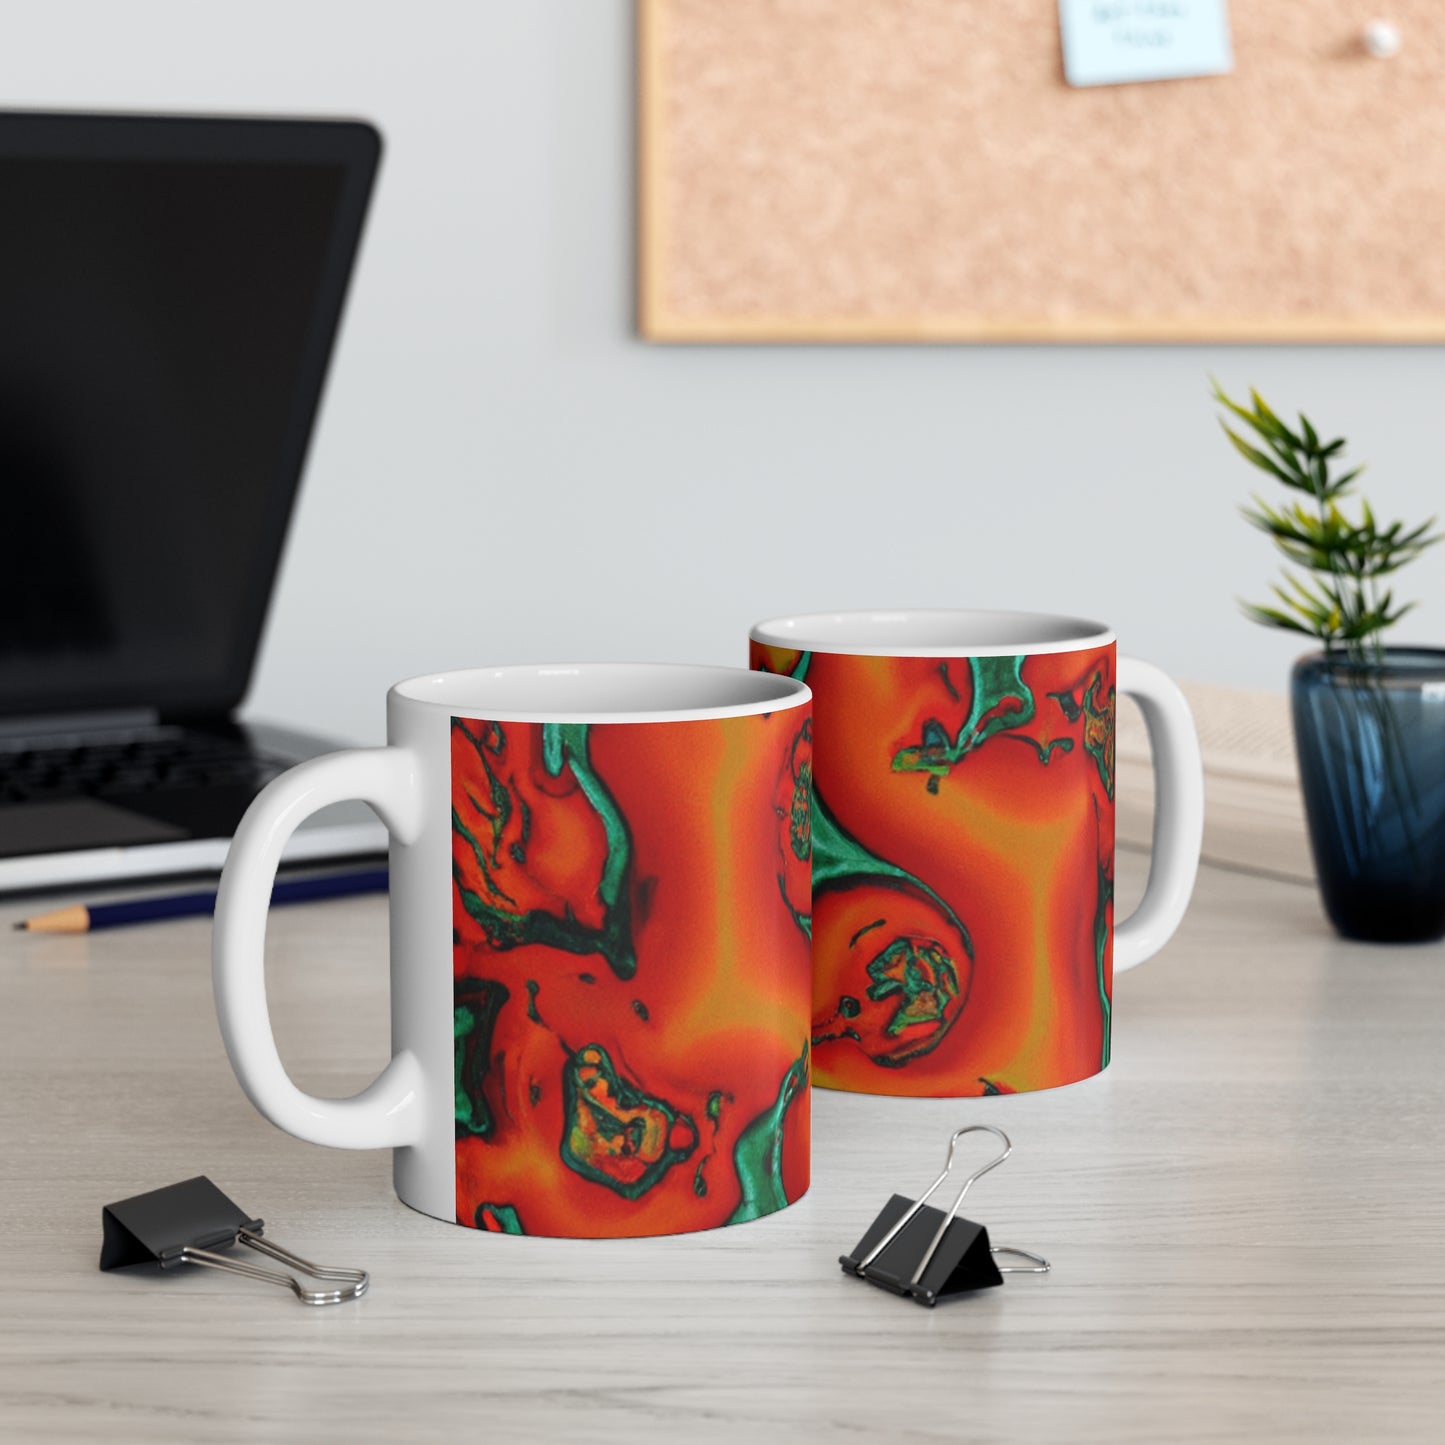 Dottie's Drip Coffee - Psychedelic Coffee Cup Mug 11 Ounce